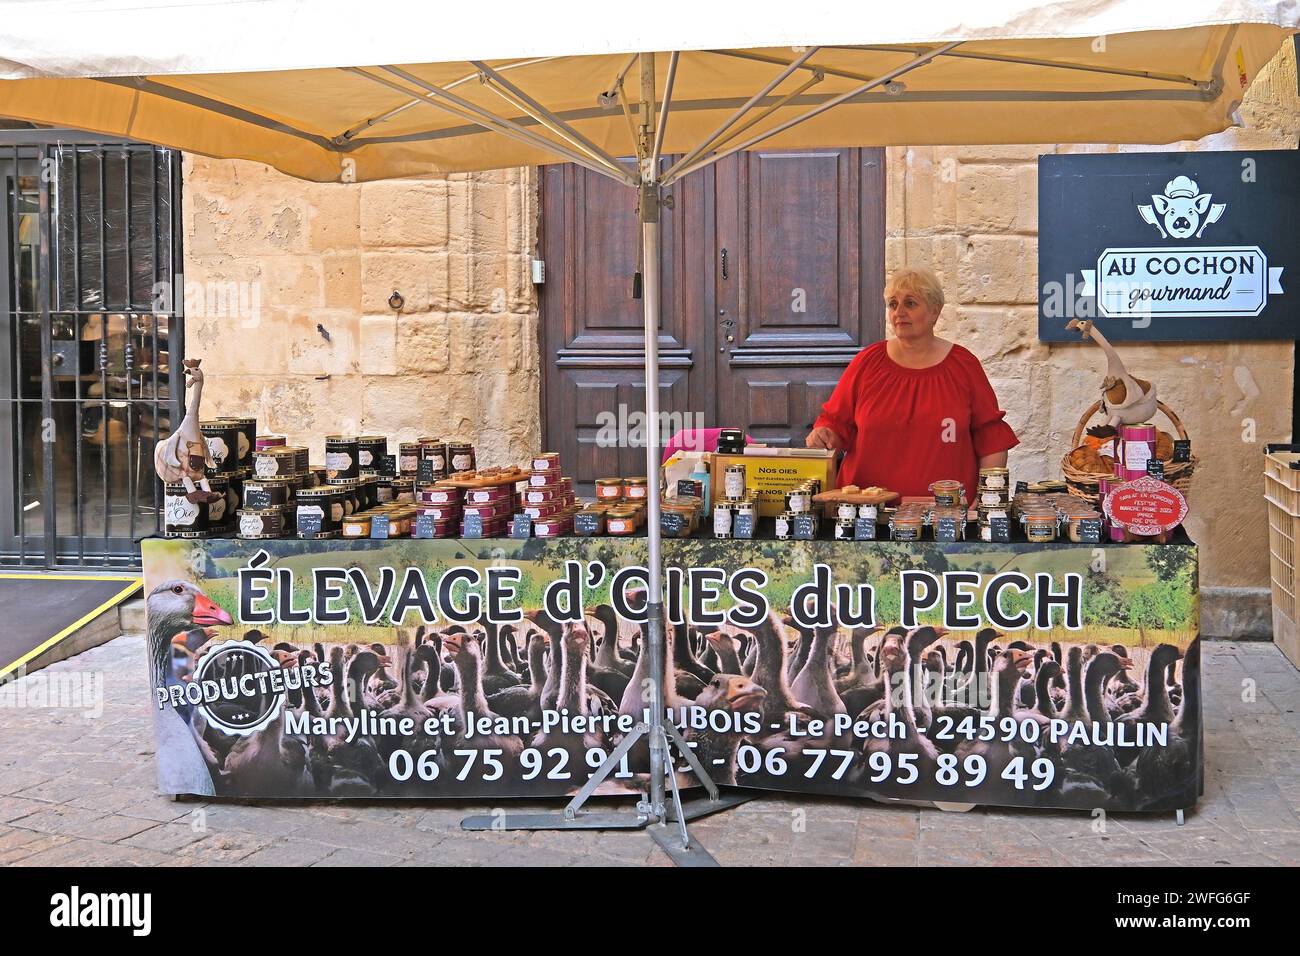 Stall at the Saturday market selling various local products in Sarlat France Stock Photo